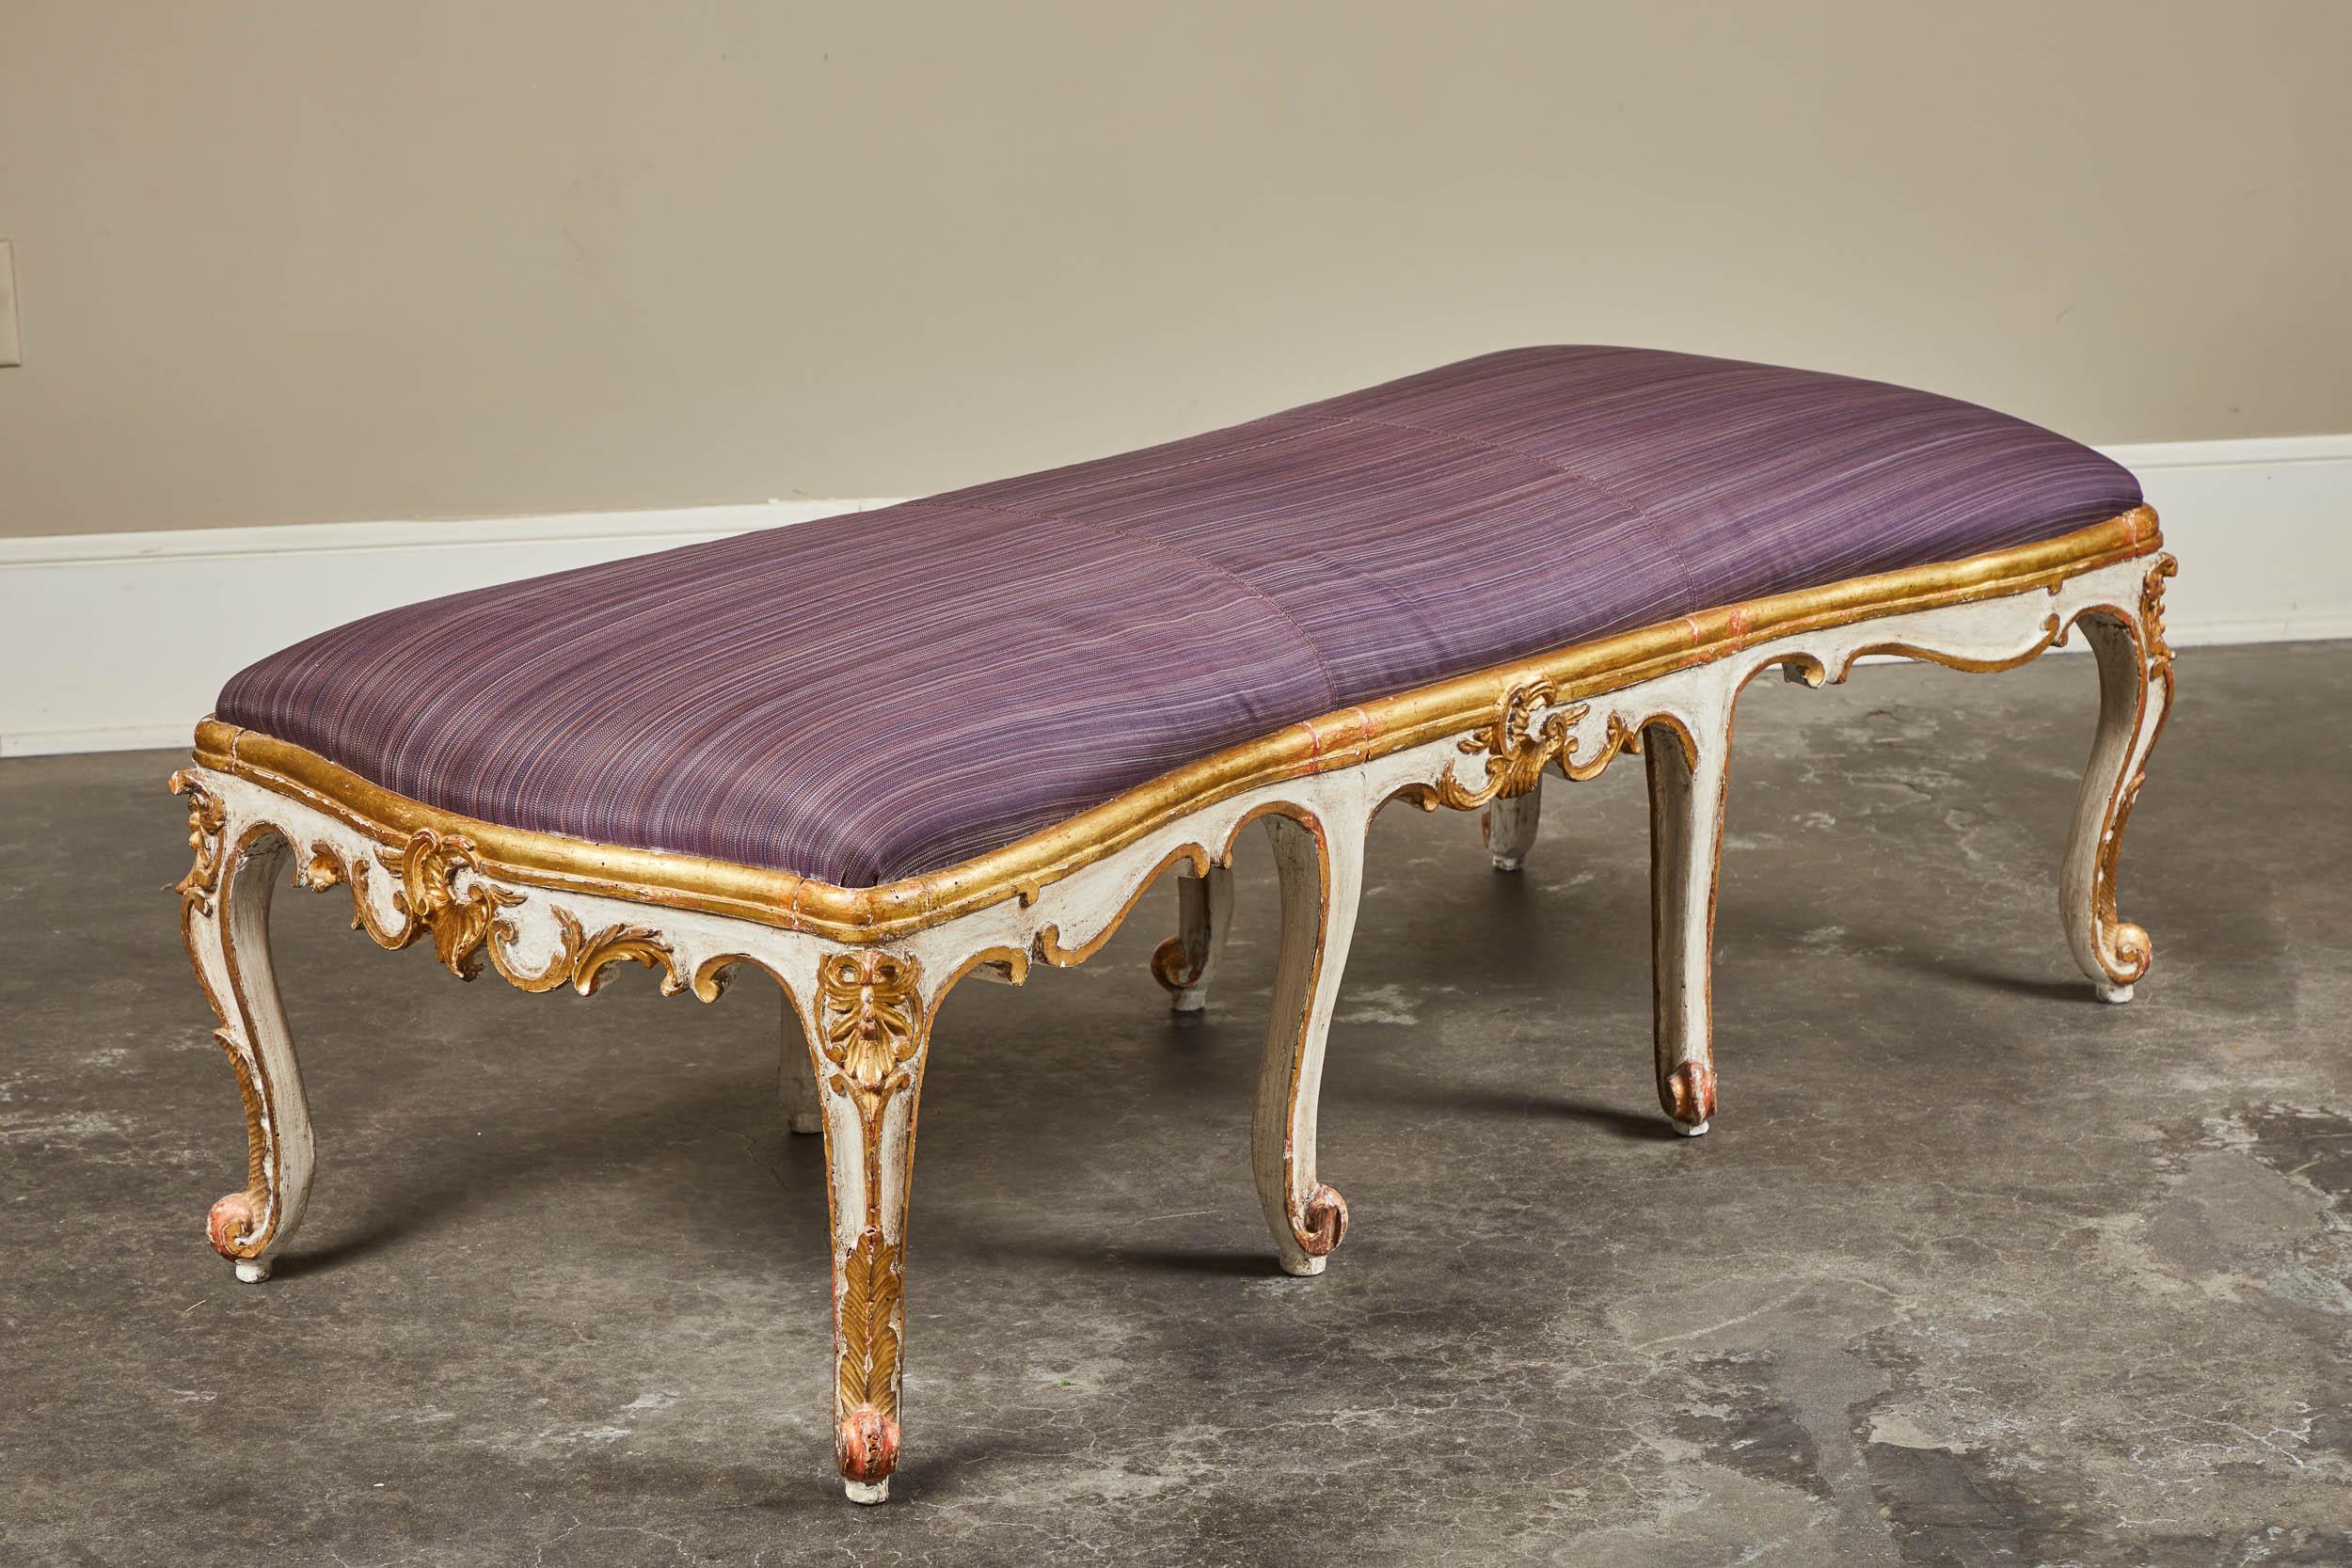 Rococo 18th Century Italian Bench with Horsehair Upholstery